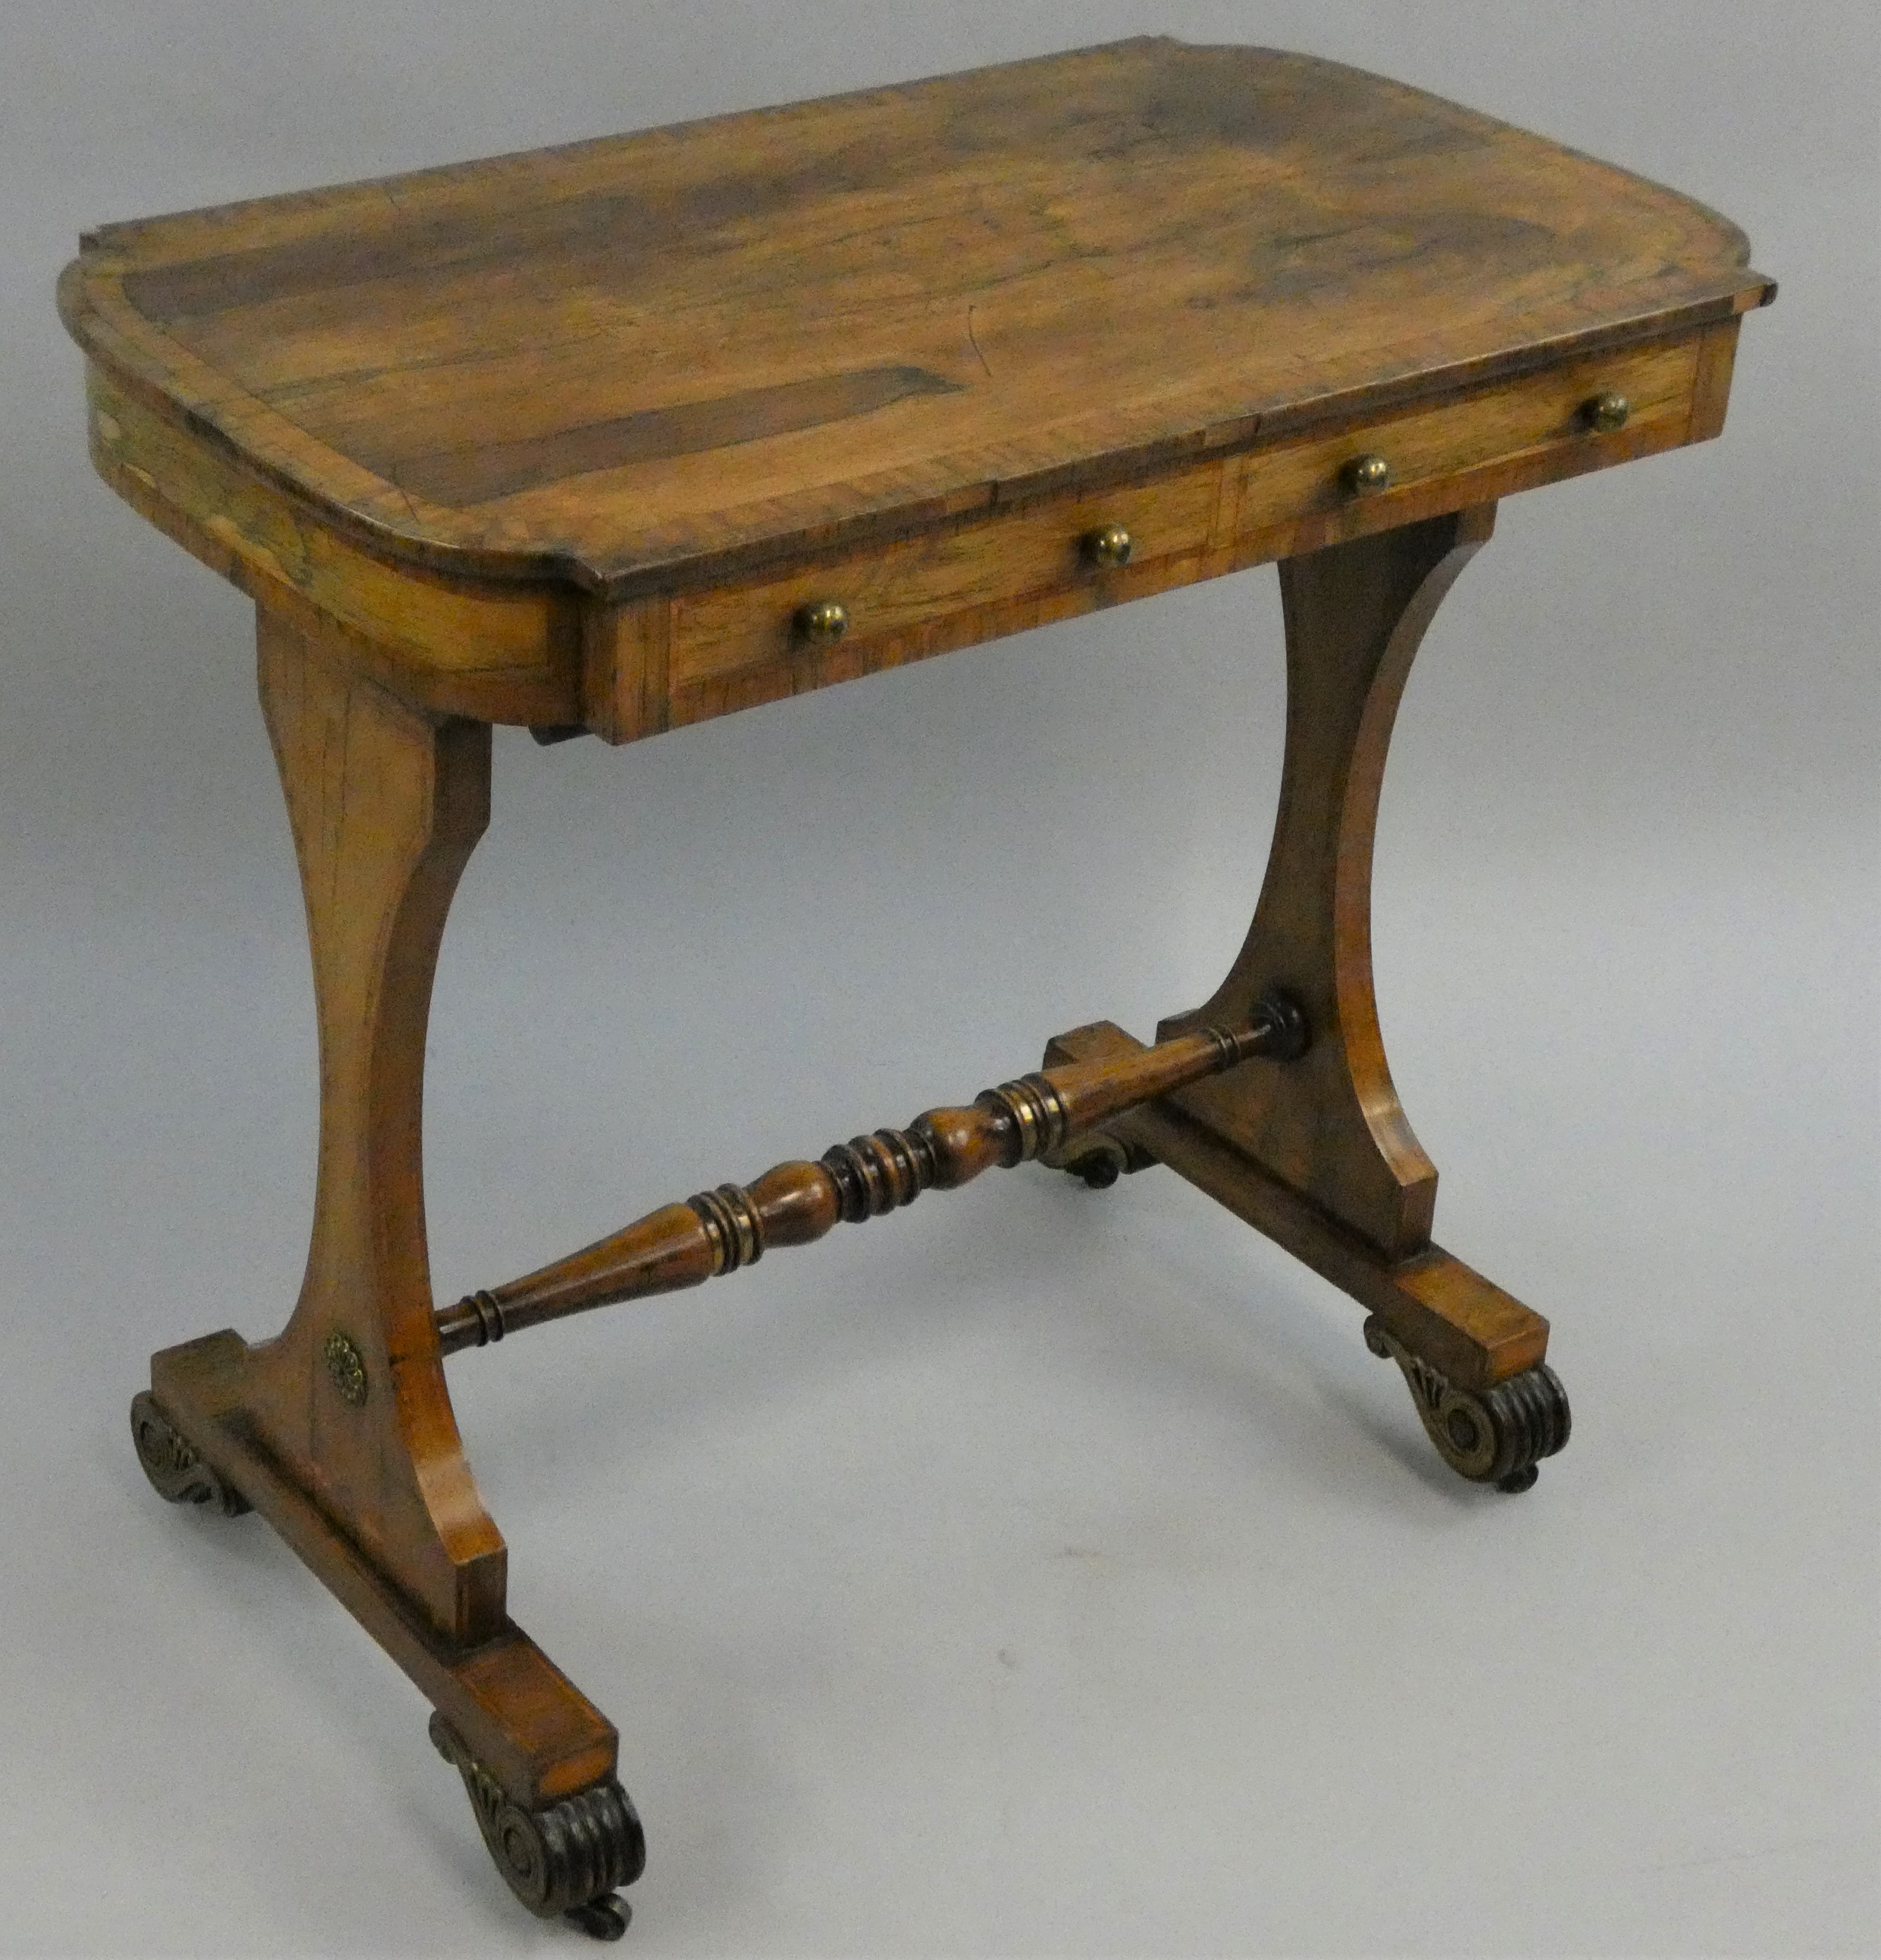 A George III rosewood and boxwood strung side table, with two frieze drawers, lyre shaped supports